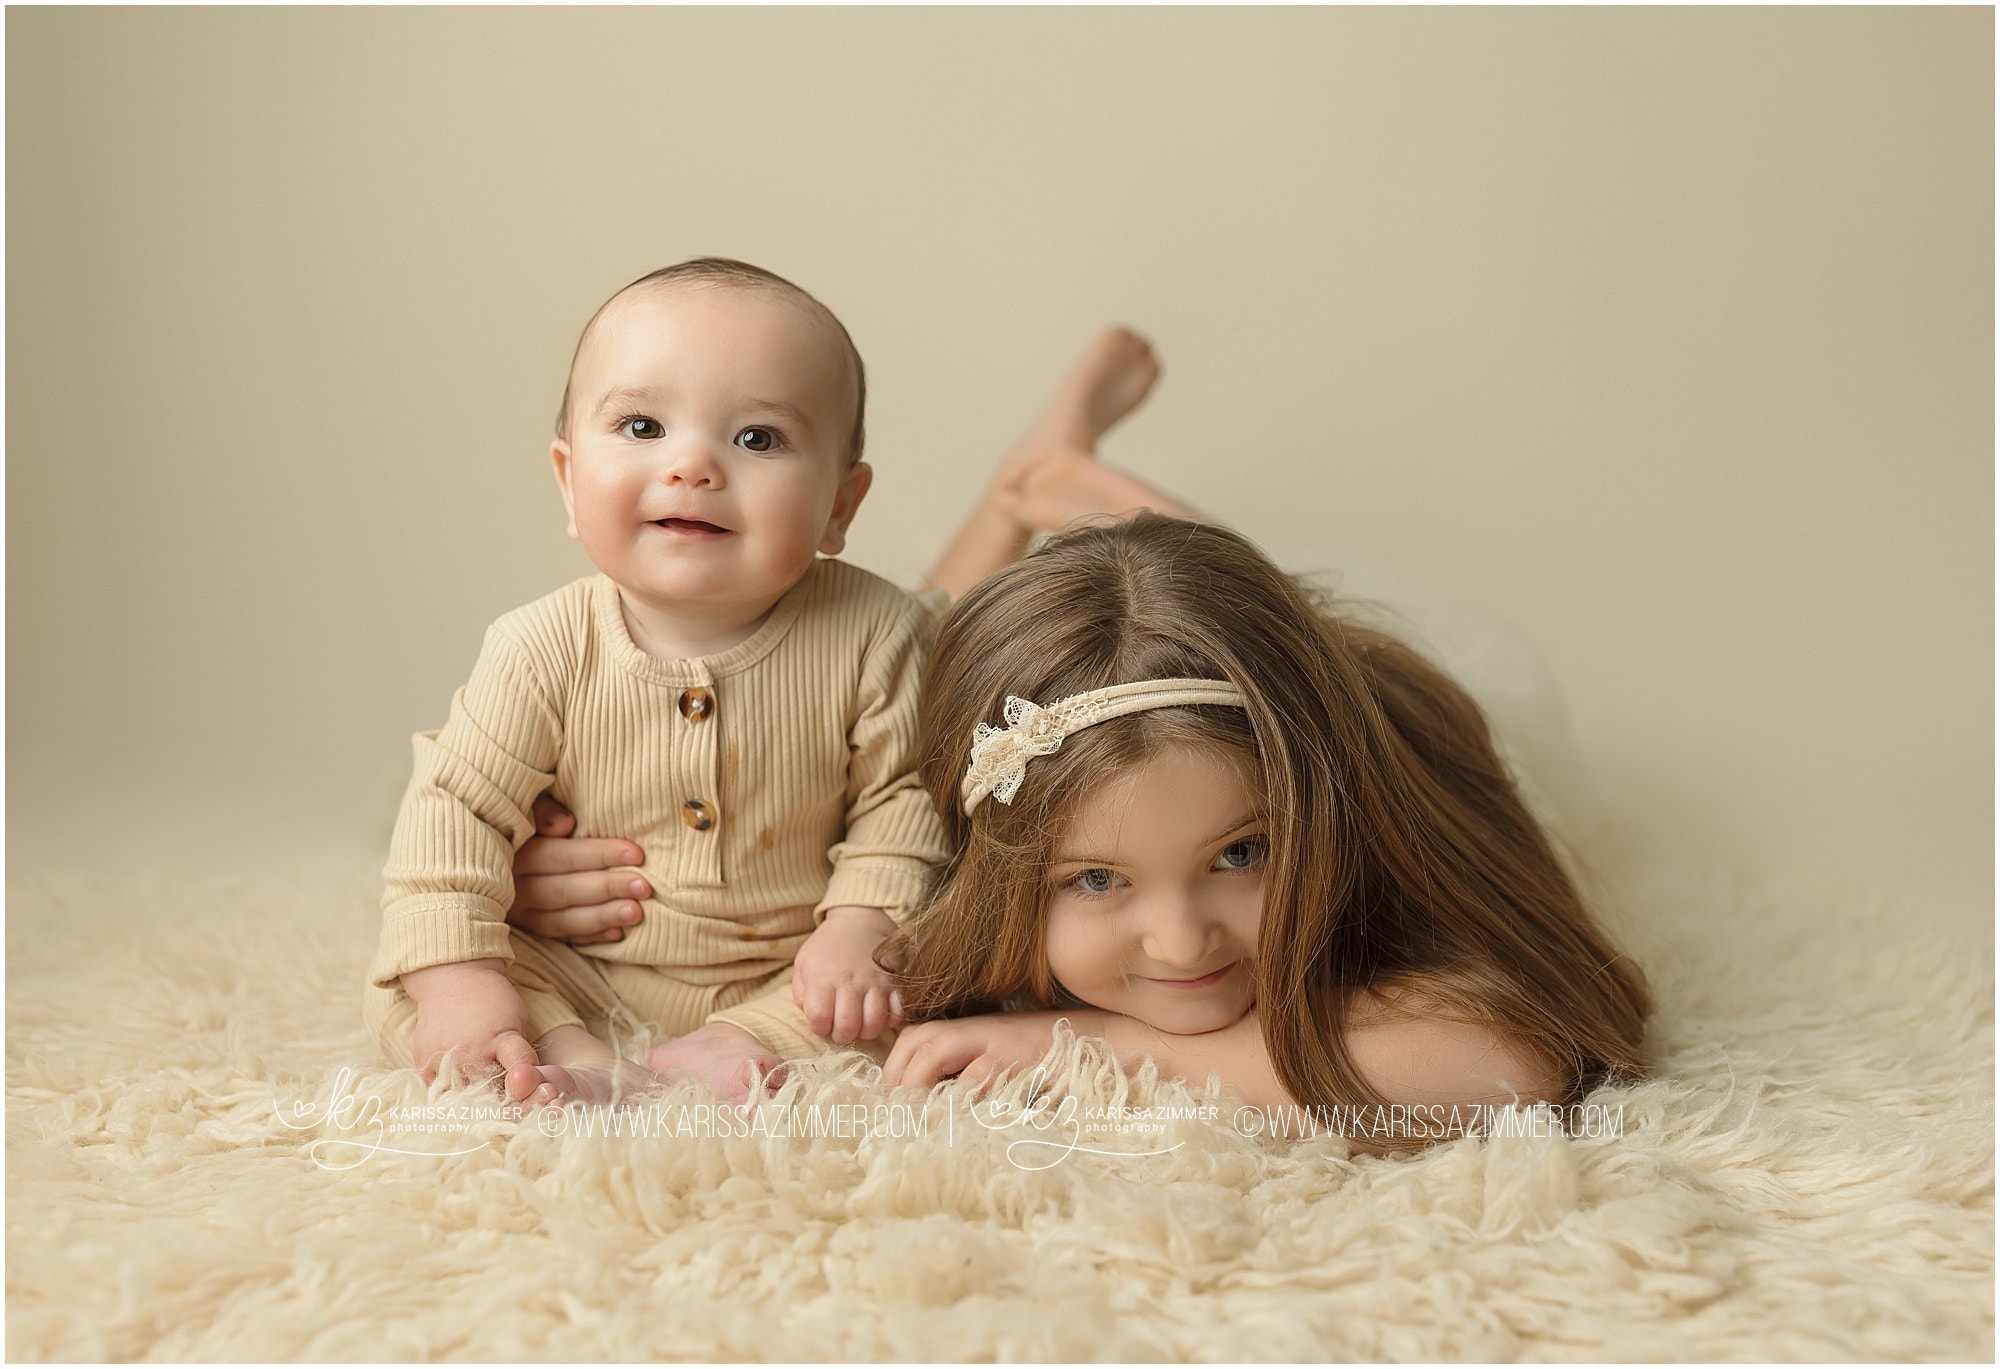 sibling studio photography by karissa zimmer photography